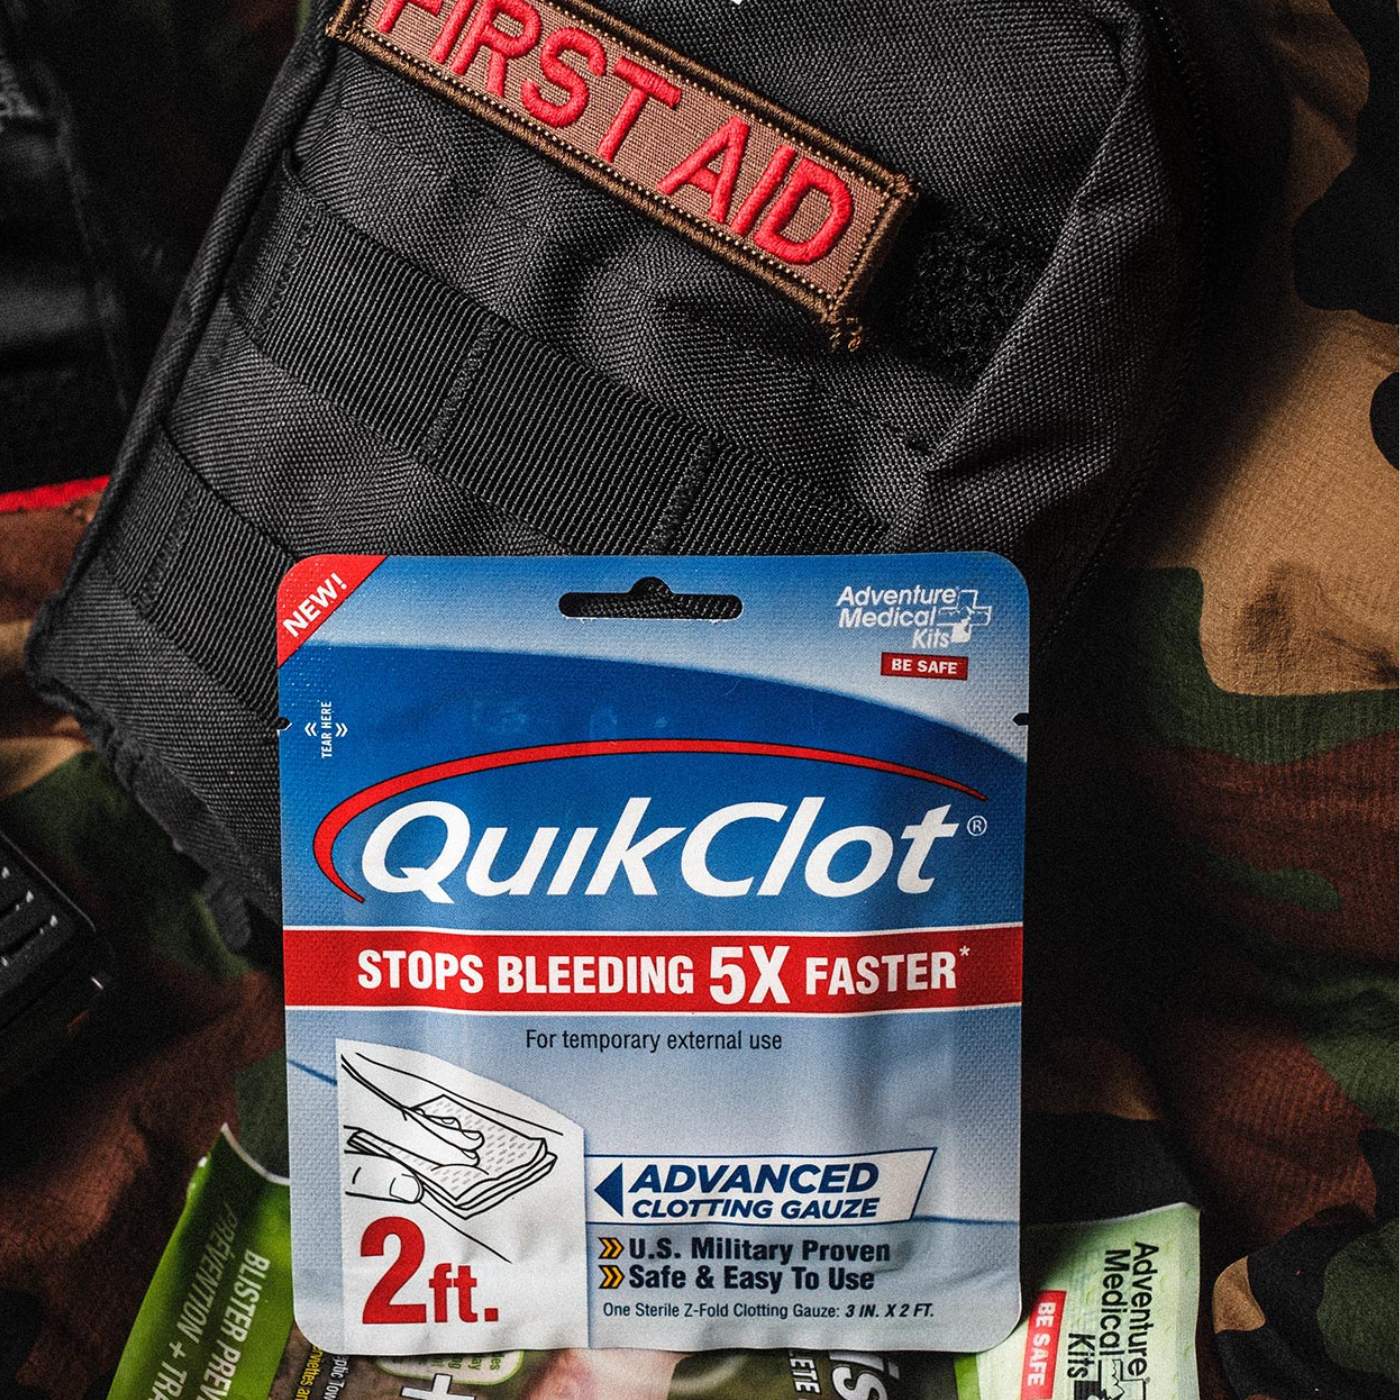 QuikClot on black MOLLE kit with First Aid patch